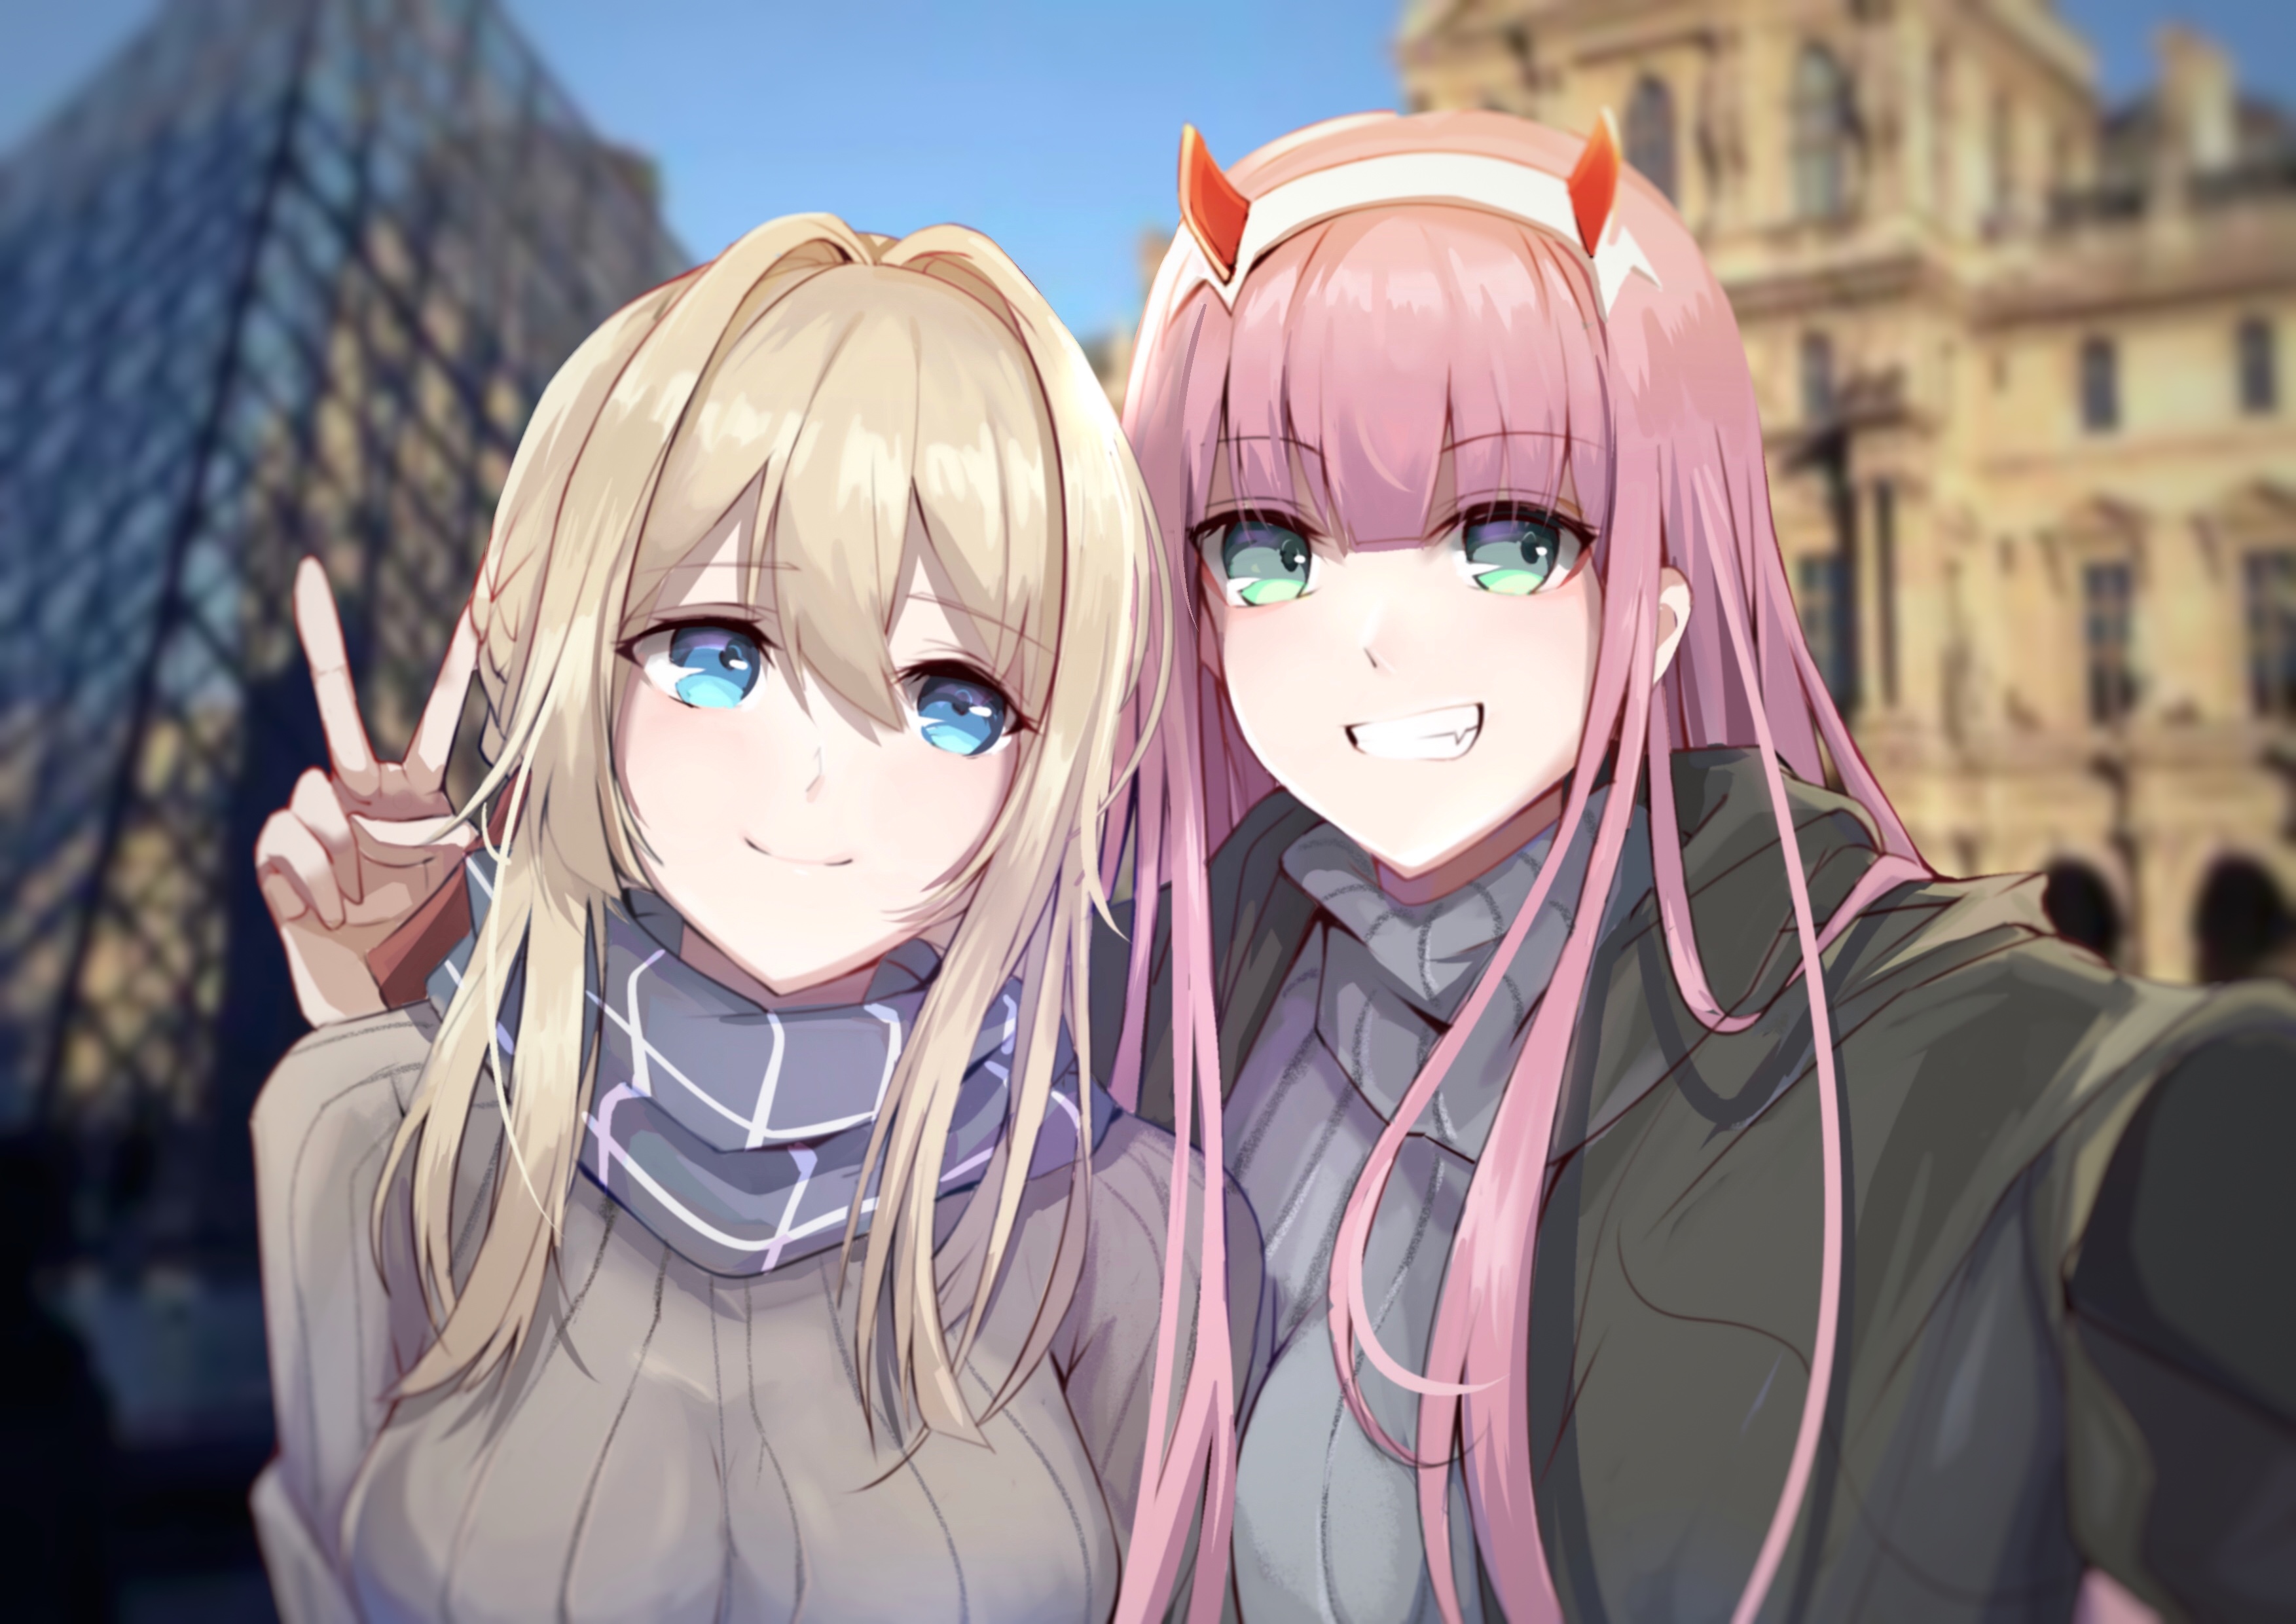 Anime 3507x2480 Darling in the FranXX Zero Two (Darling in the FranXX) Violet Evergarden Violet Evergarden (character) selfies